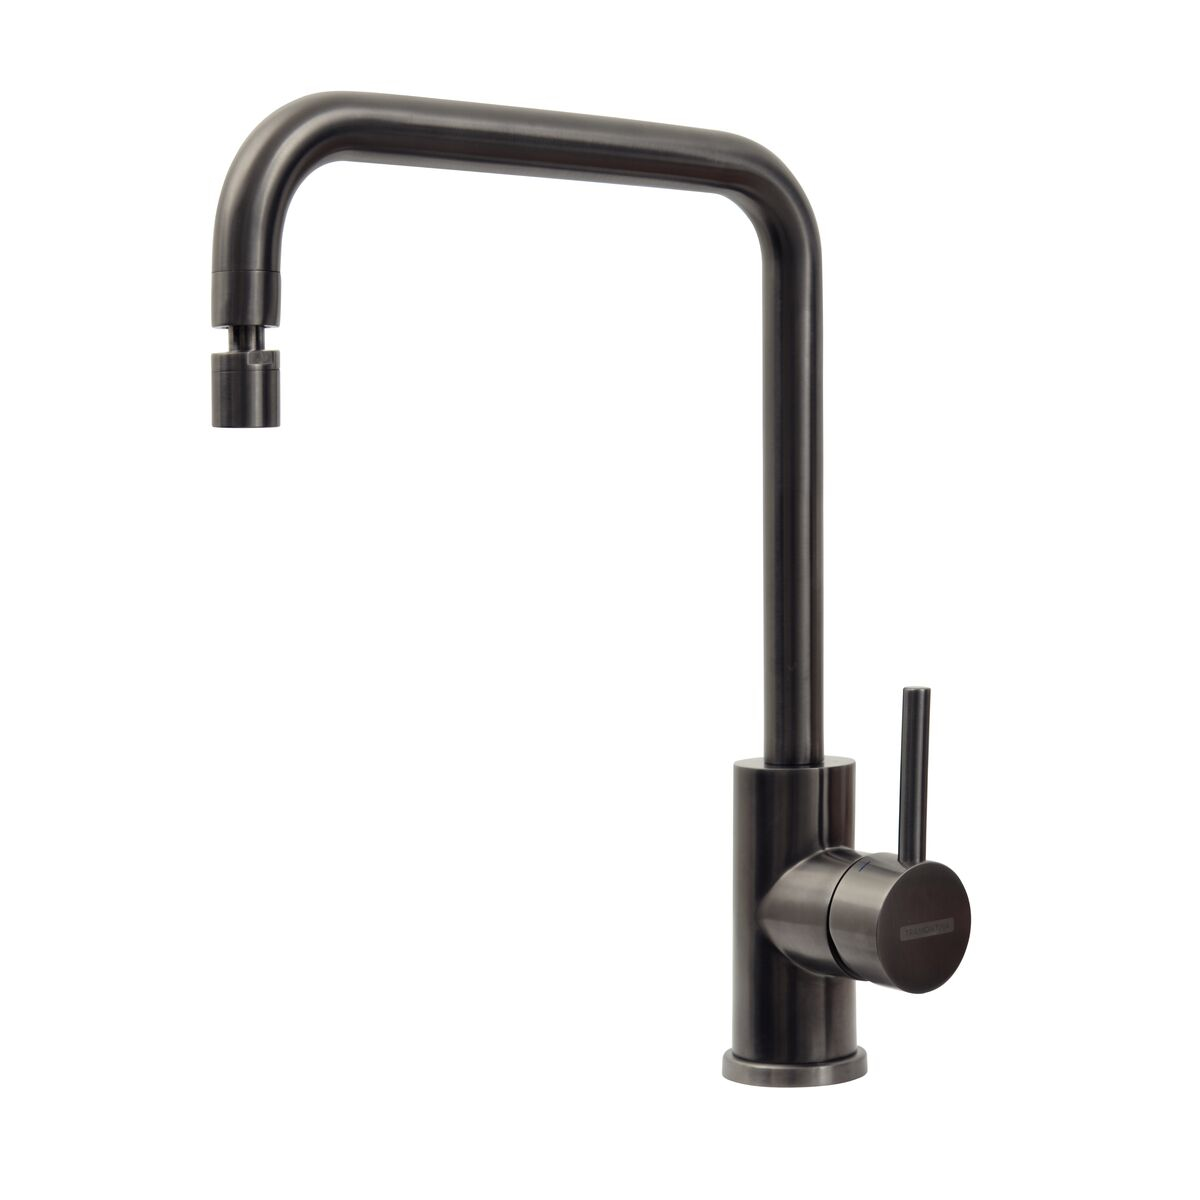 Tramontina Angolare stainless steel Black single lever mixer faucet with articulated spout and PVD coating